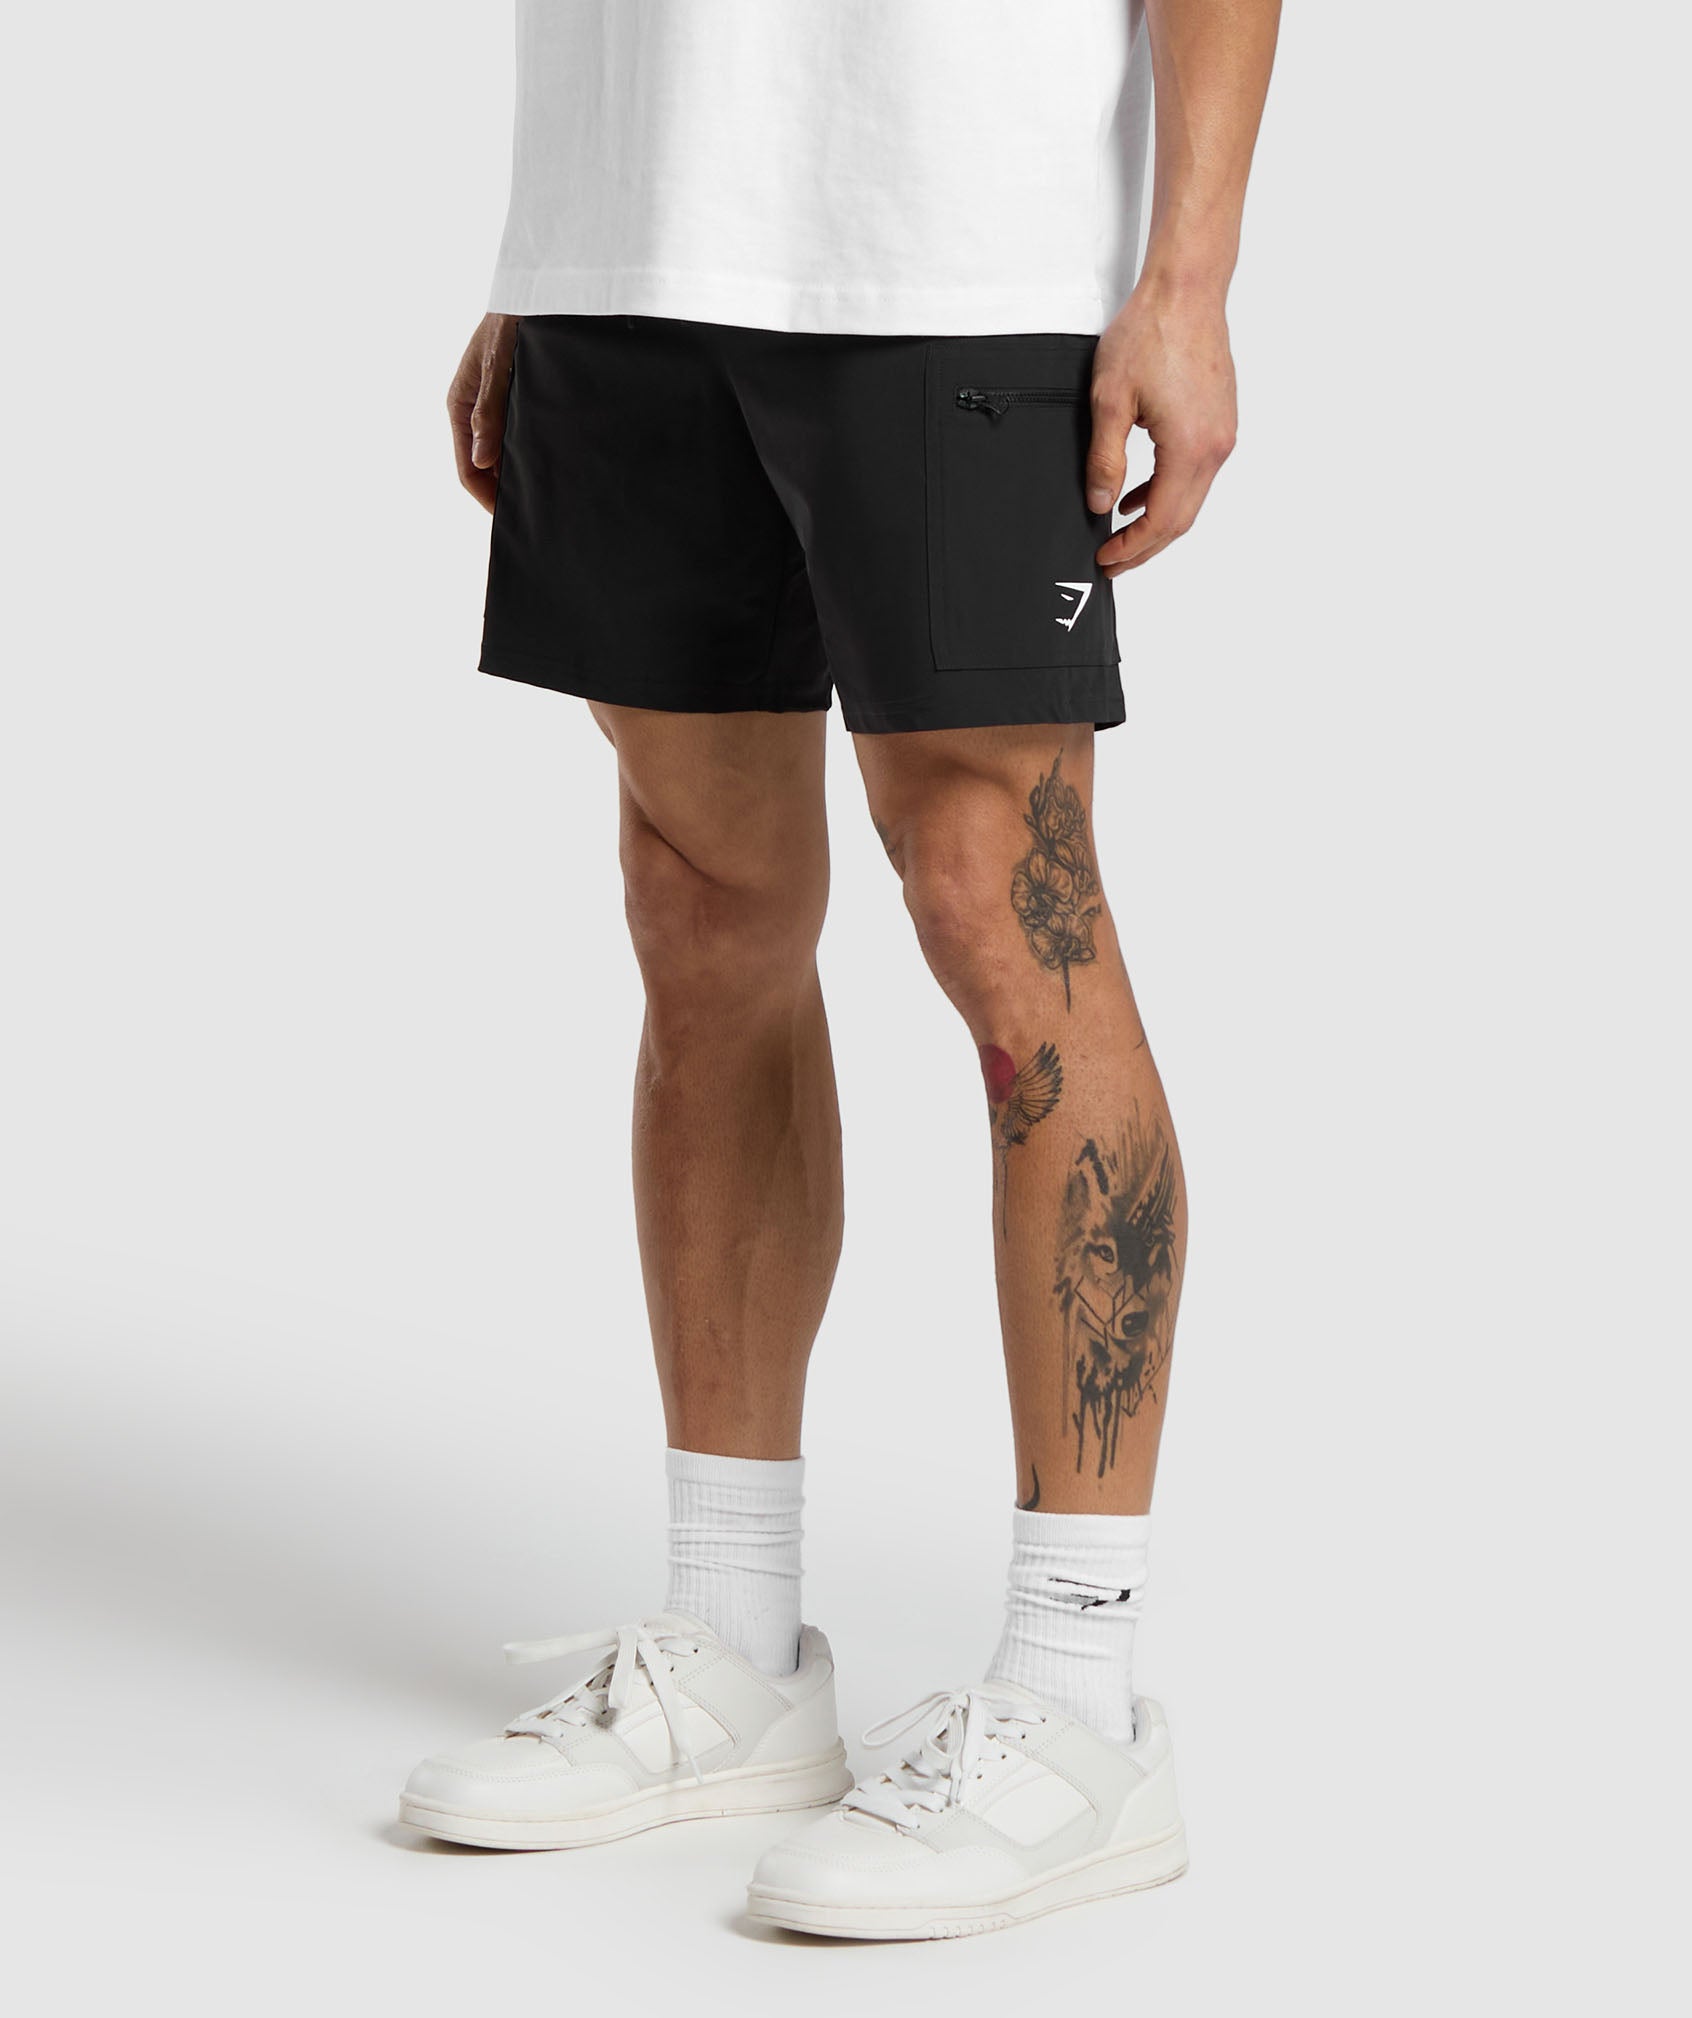 Rest Day 6" Cargo Shorts in Black - view 3